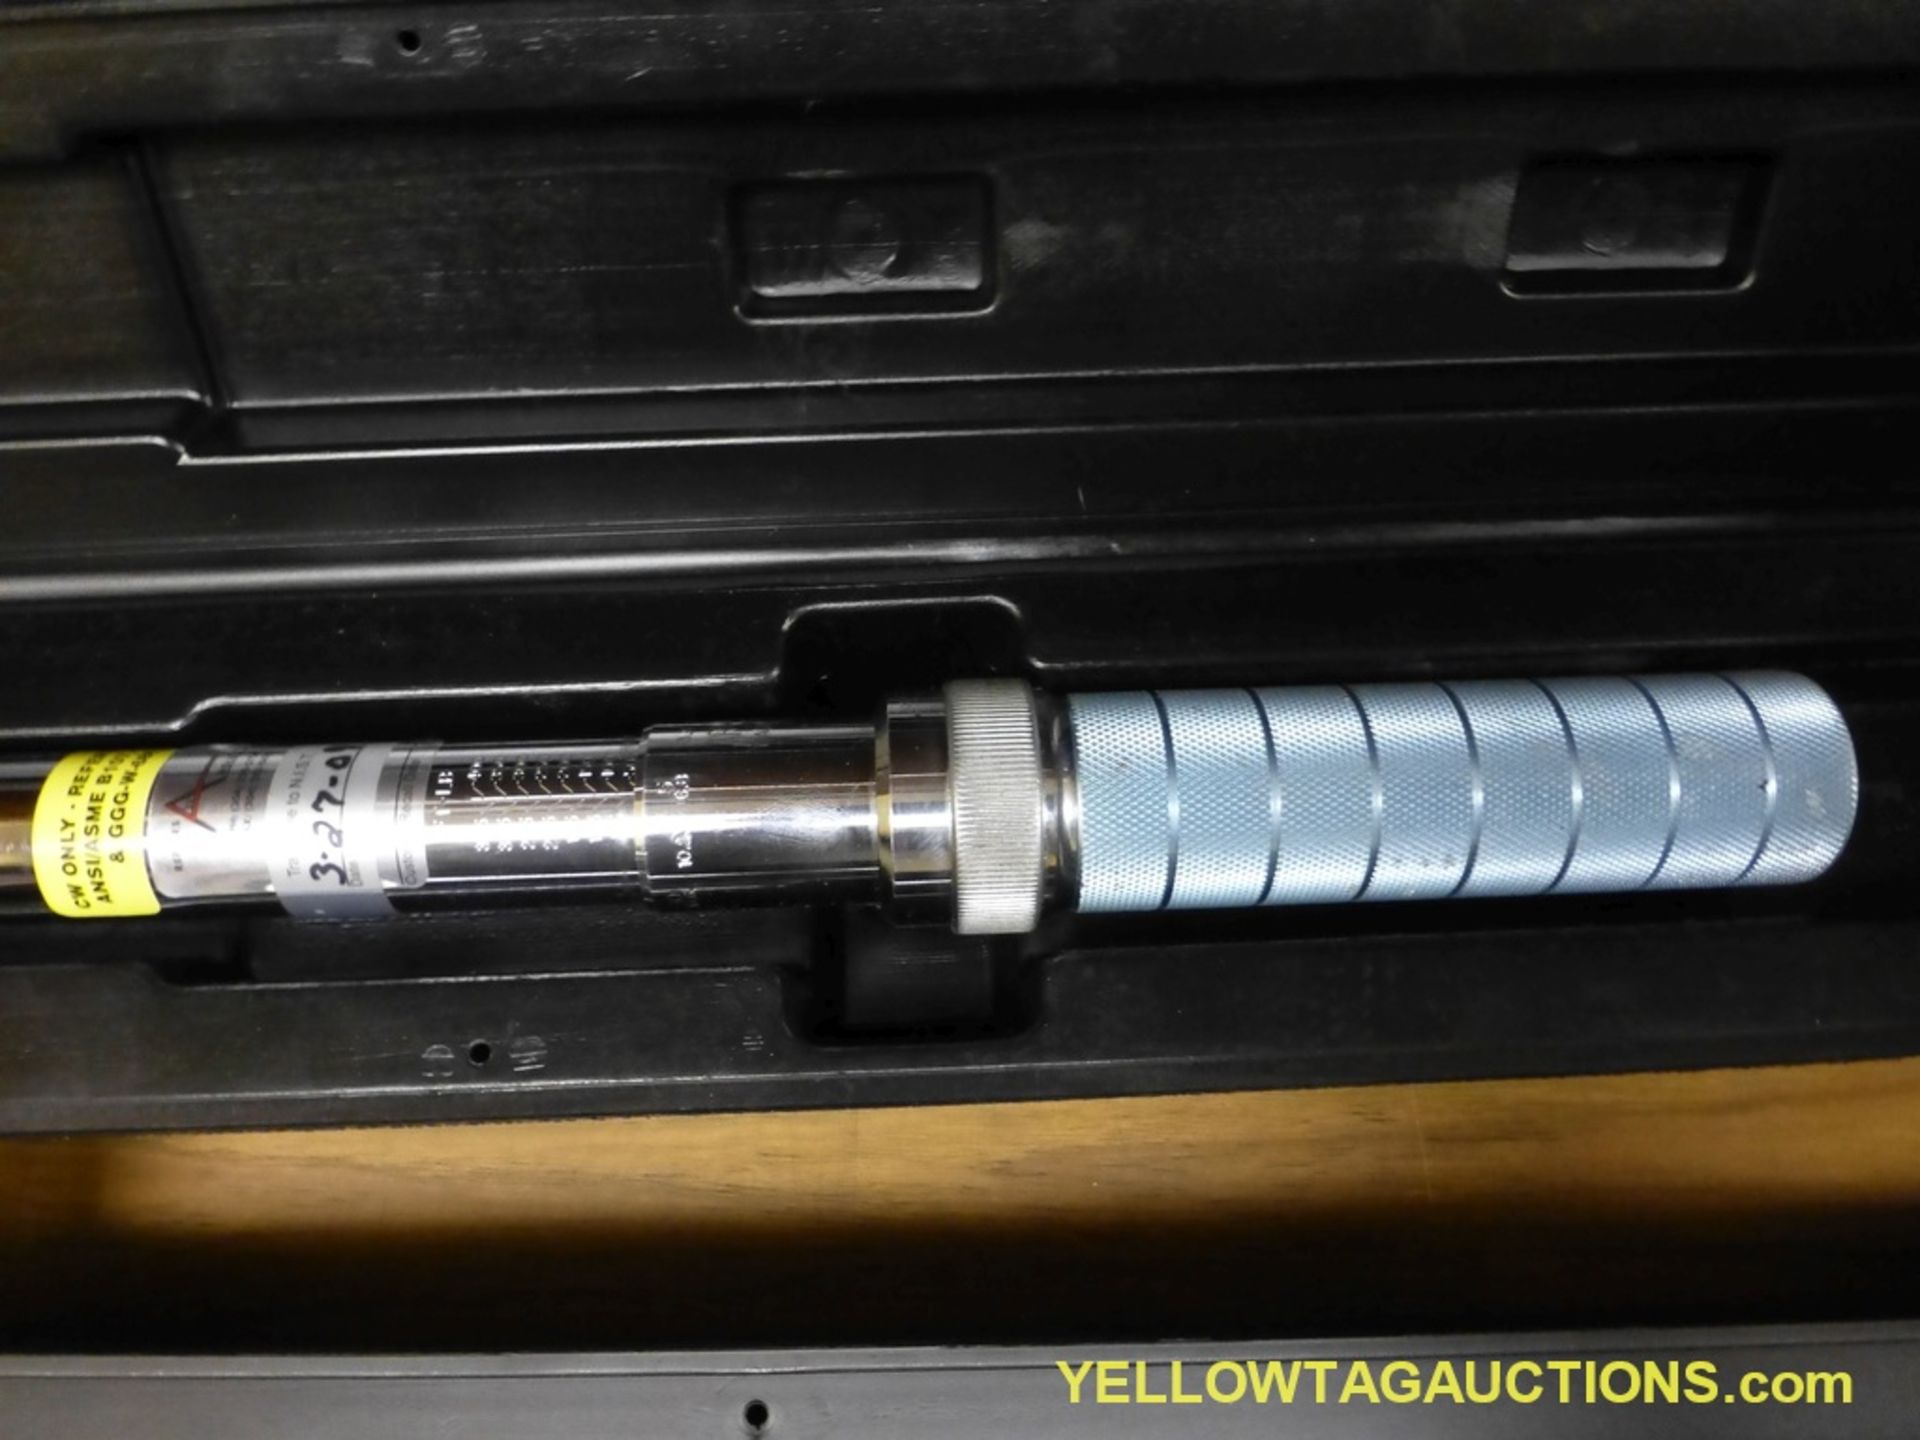 Armstrong Torque Wrench | Model No. 64-094 - Image 3 of 3